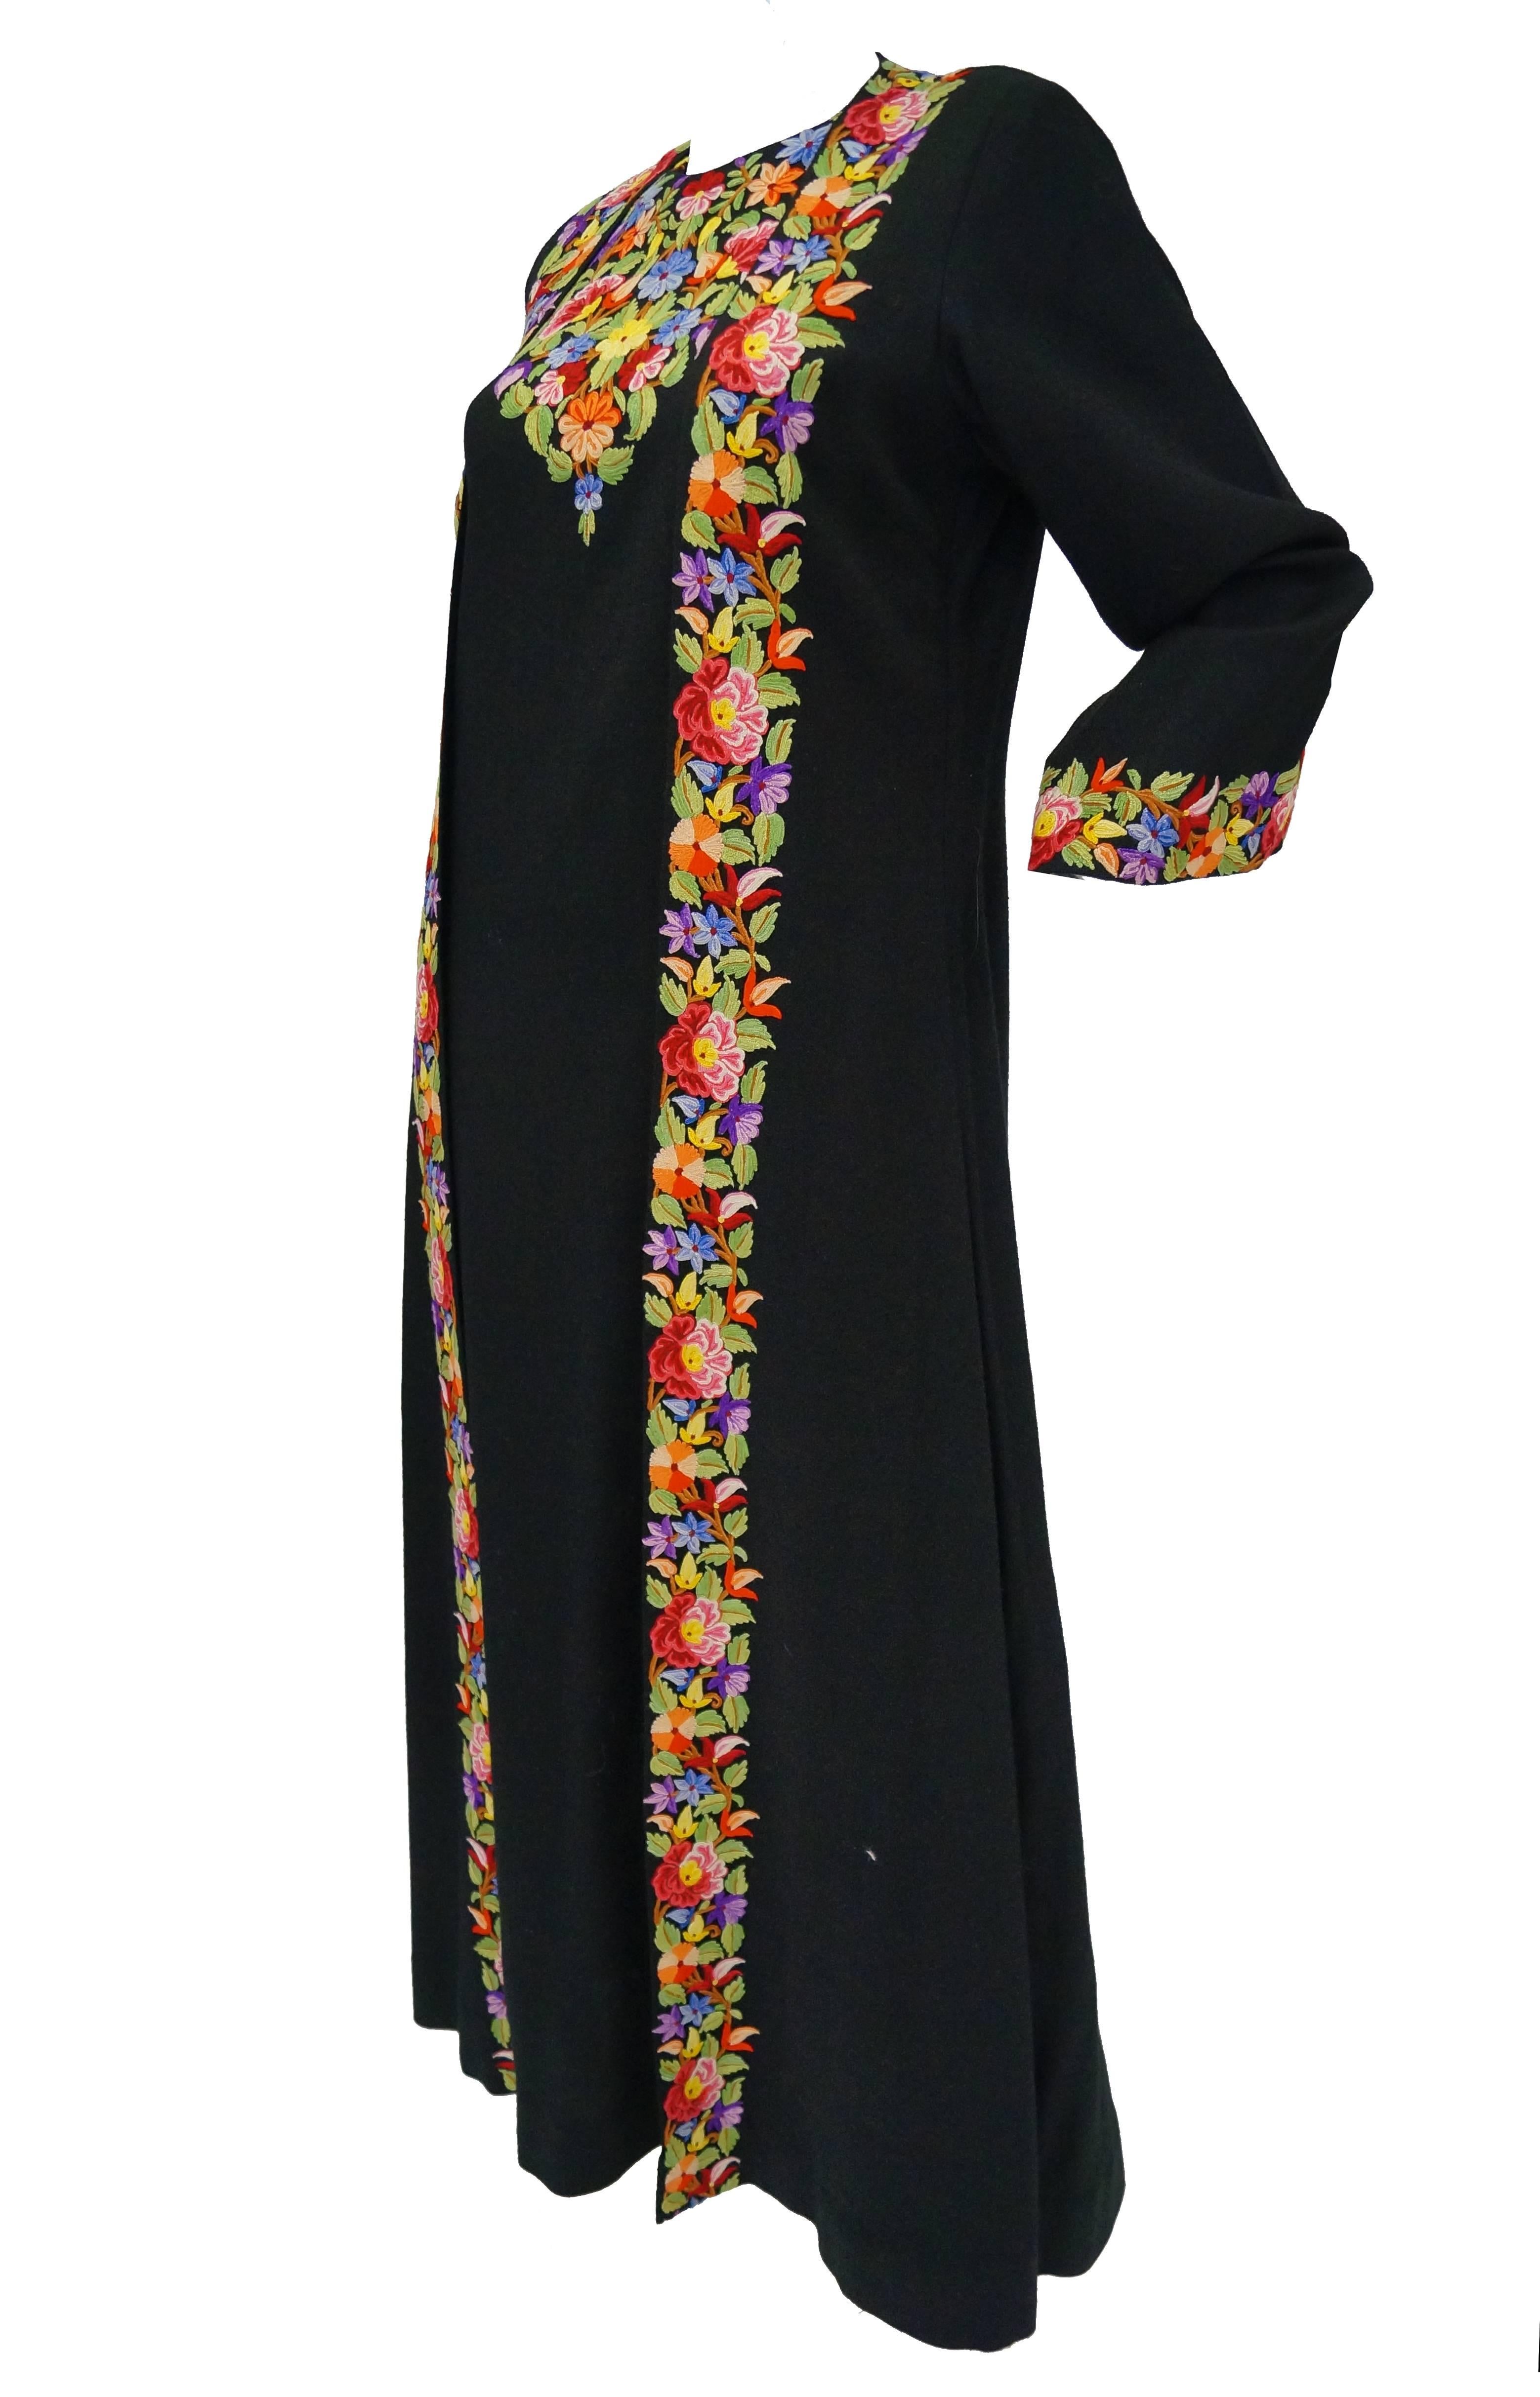 Colorful one piece full length wrap dress coat featured at the famous "Suffering Moses" boutique known for curating all forms of artisan created wares, including works of crewel textiles.  

The dress coat features an elaborate, fully